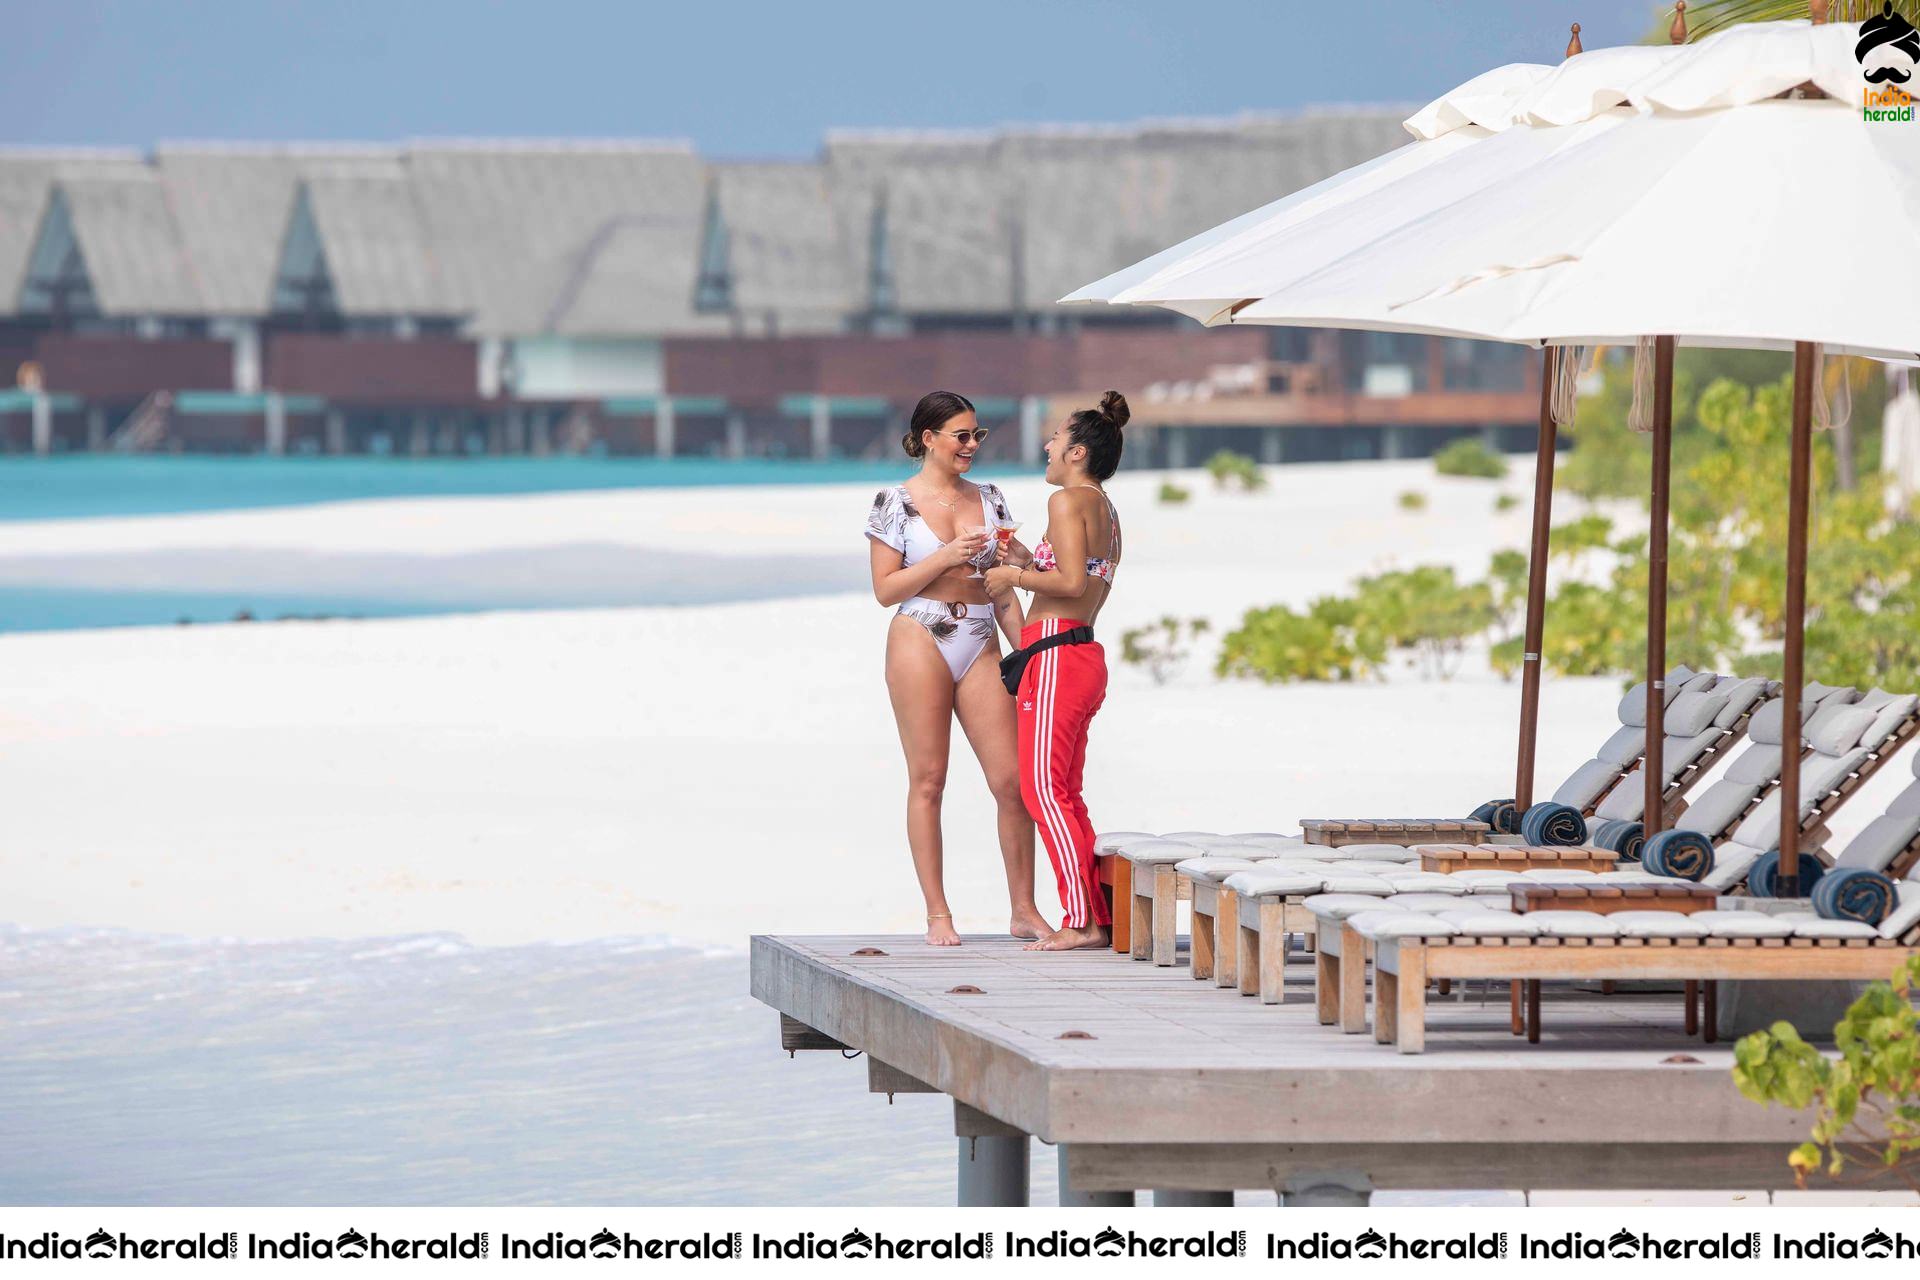 Megan Barton Hanson and Chelcee Grimes in the Maldives at the Heritance Aarah resort